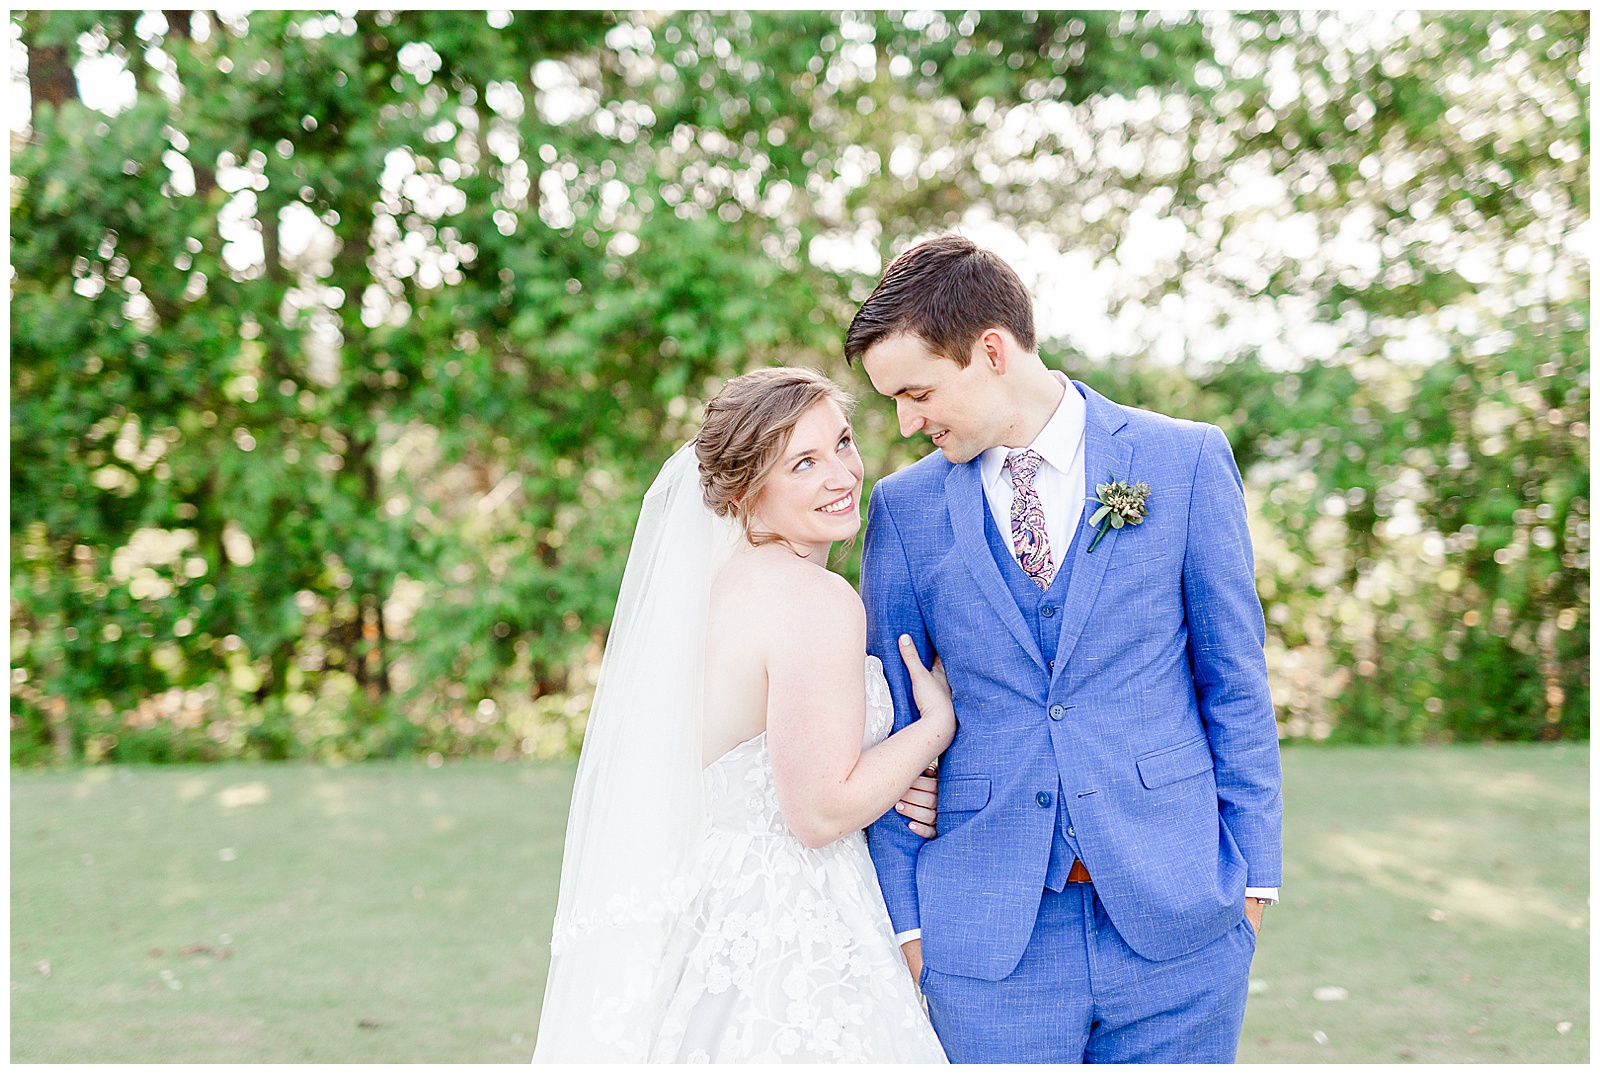 Gorgeous golden hour outdoor photos of Bride and Groom from Outdoorsy Summer Wedding at North Carolina Lakehouse | check out the full wedding at KevynDixonPhoto.com